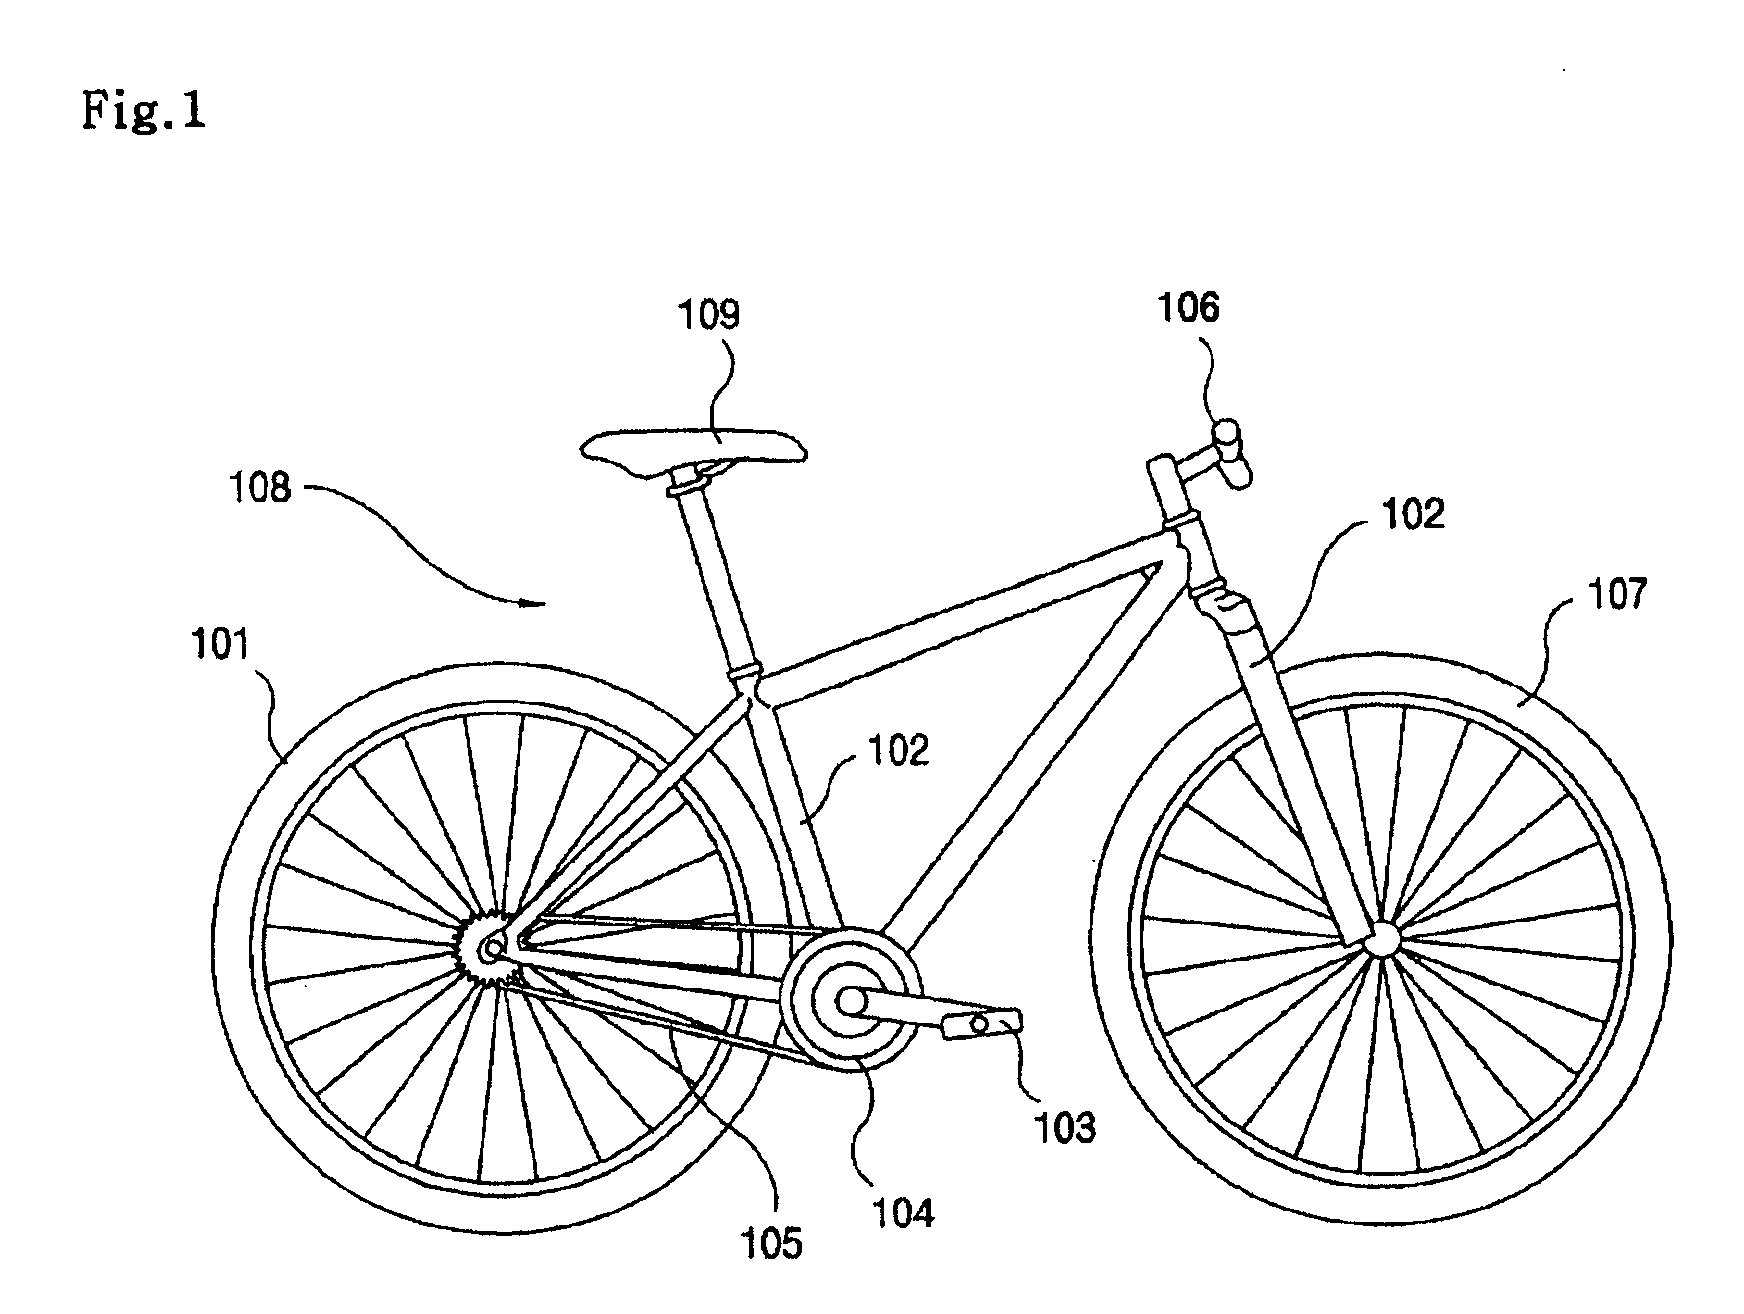 Bicycle of type driven by operation of handle